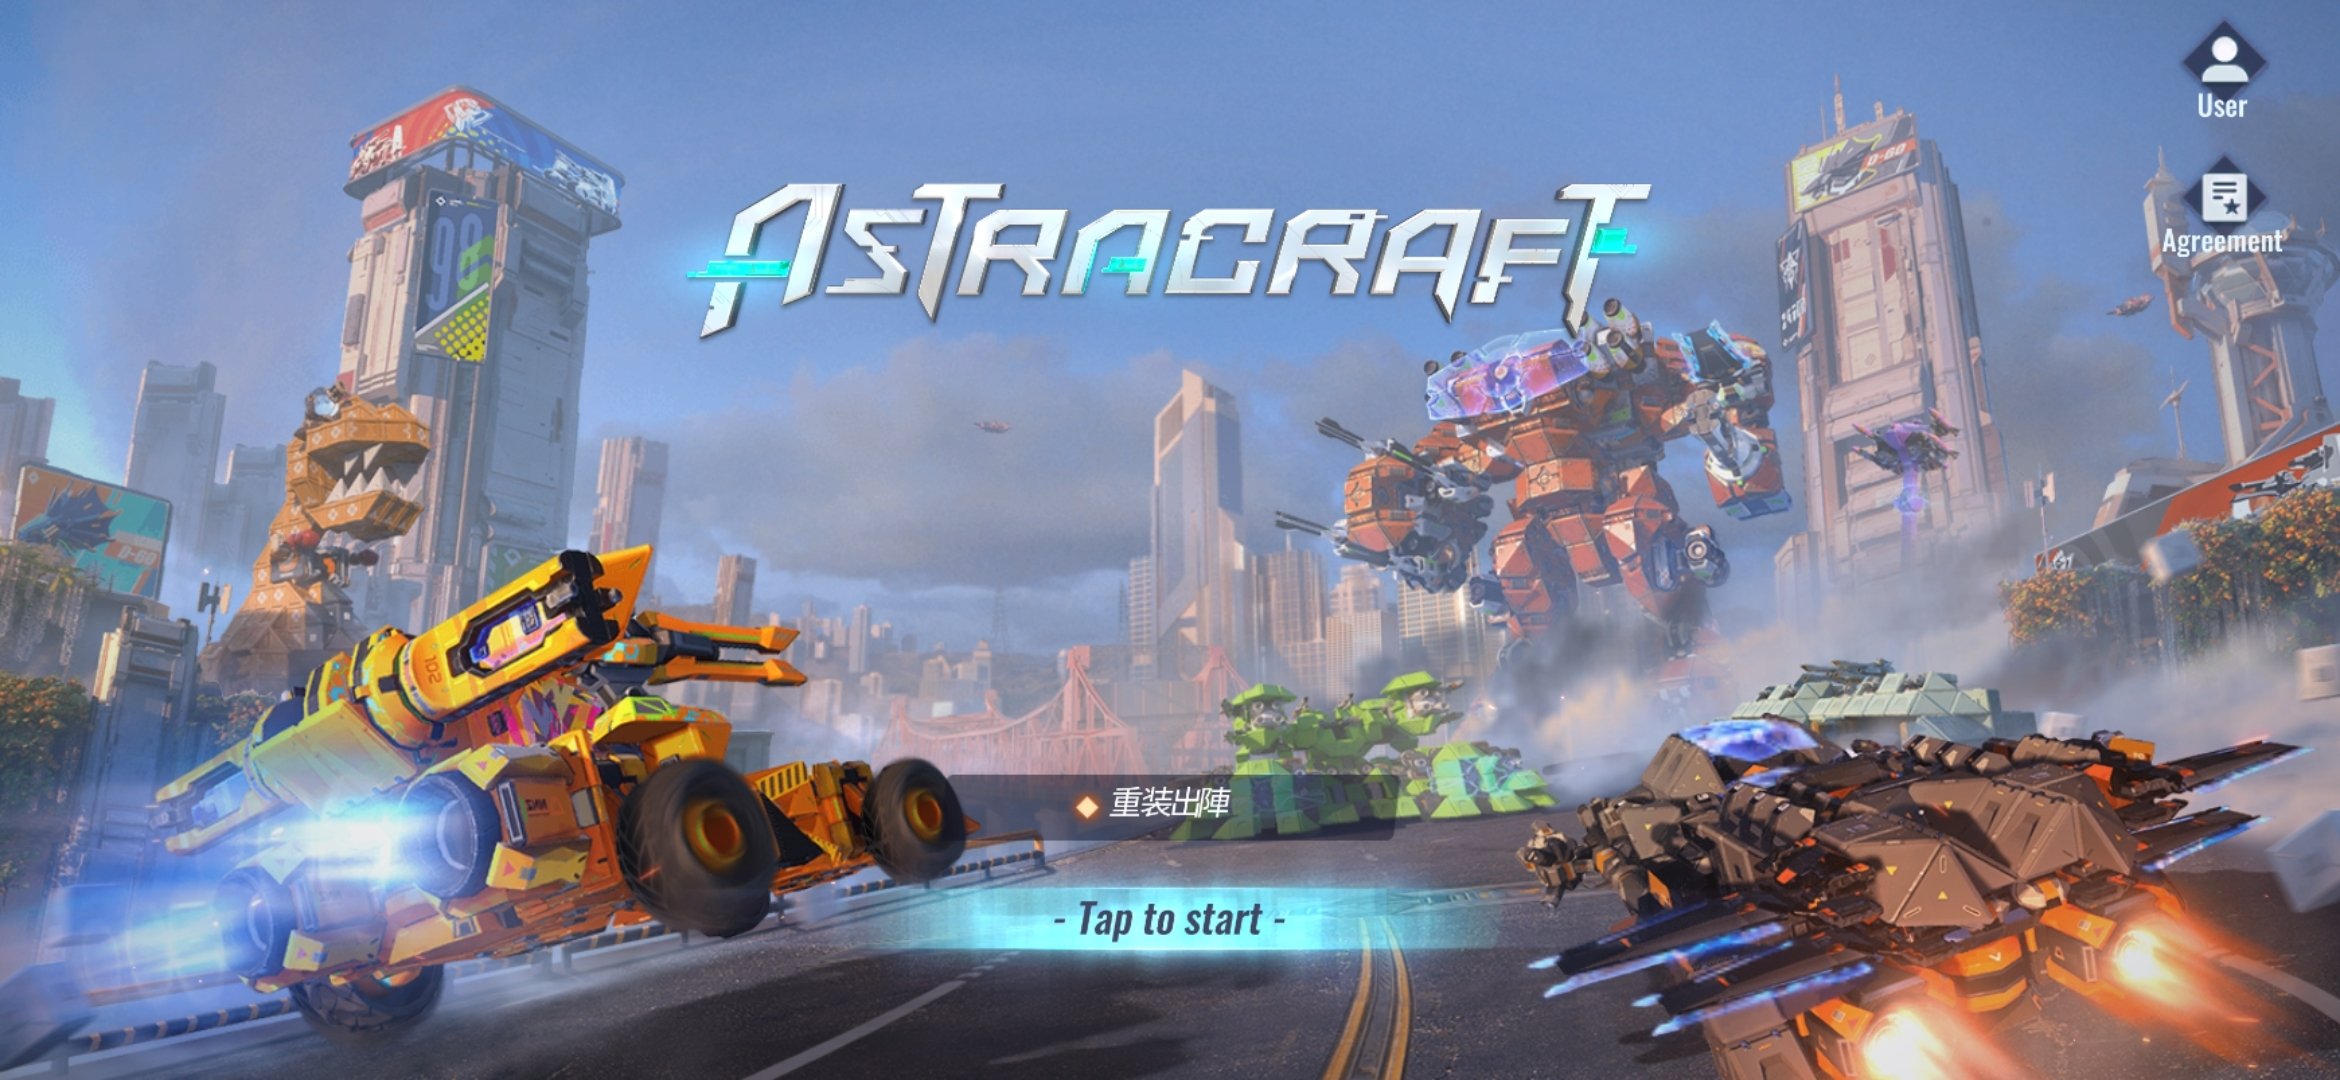 Astracraft 0.100.118 Download for Android APK Free